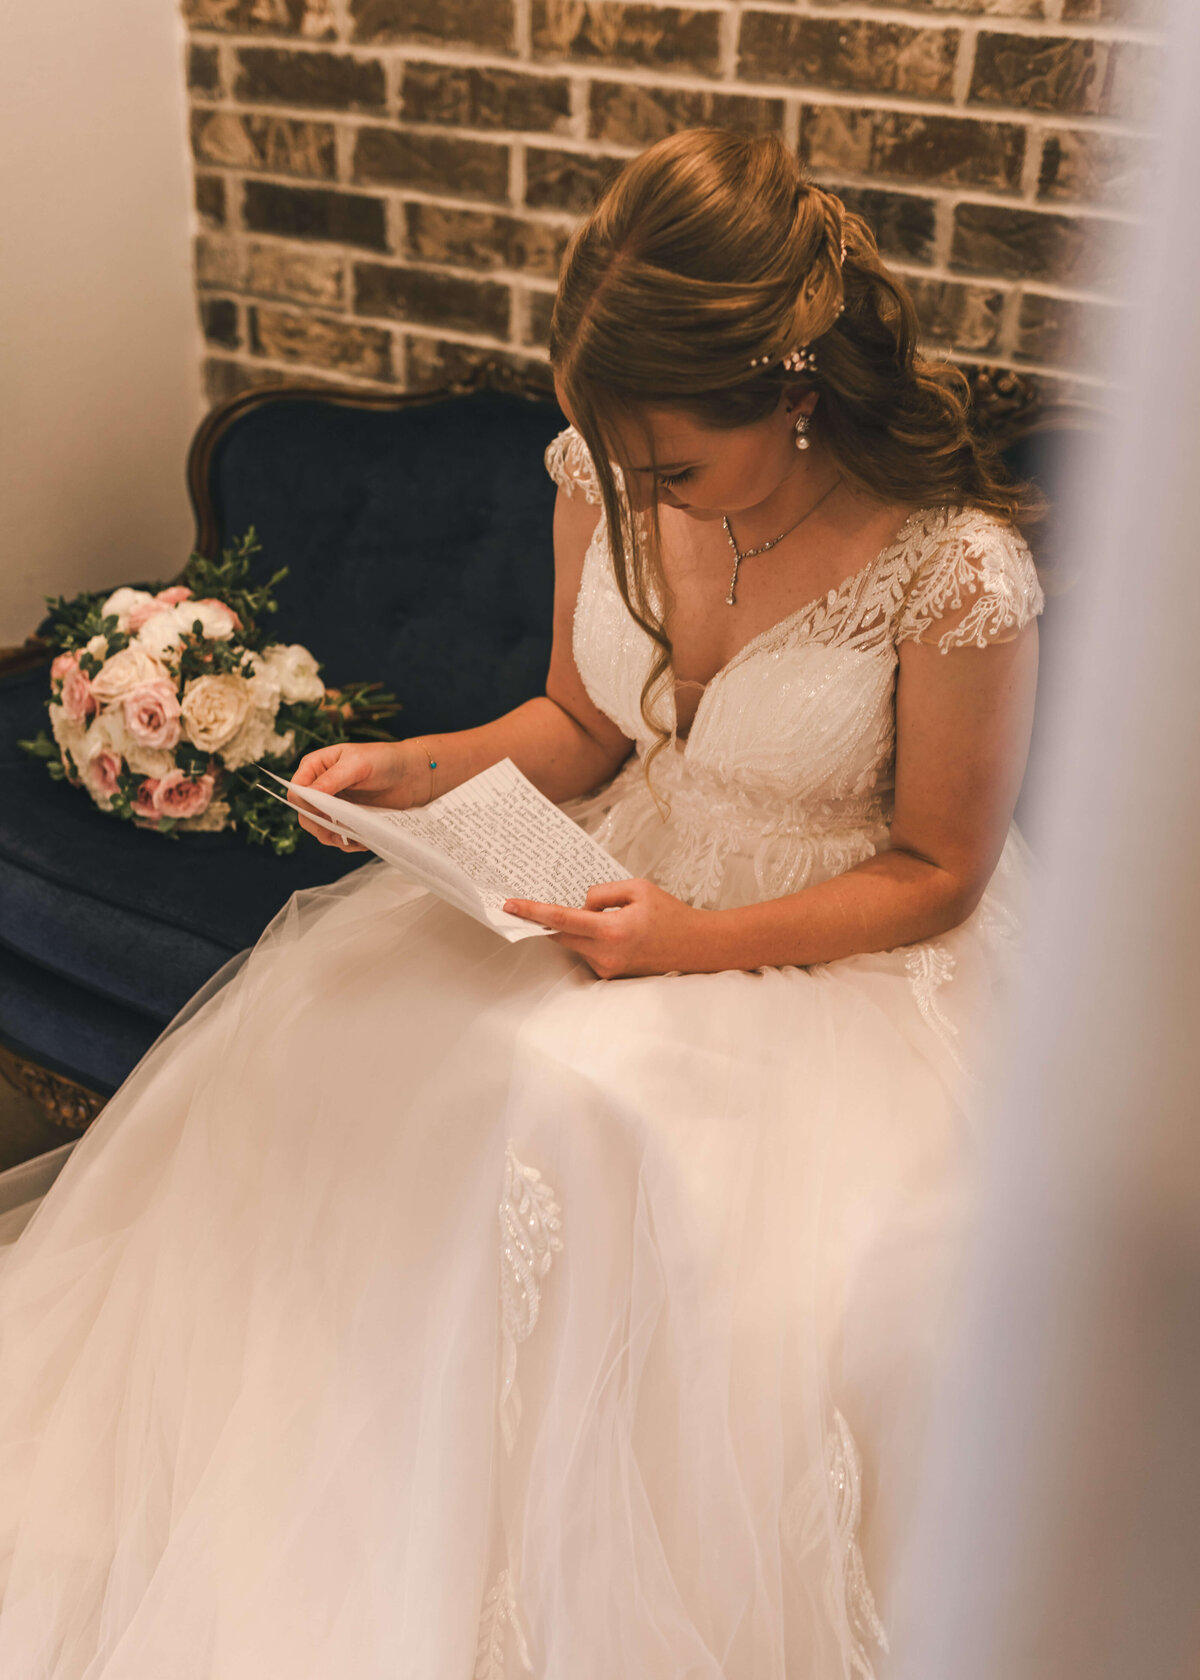 bride reads private letter from groom in bridal suite